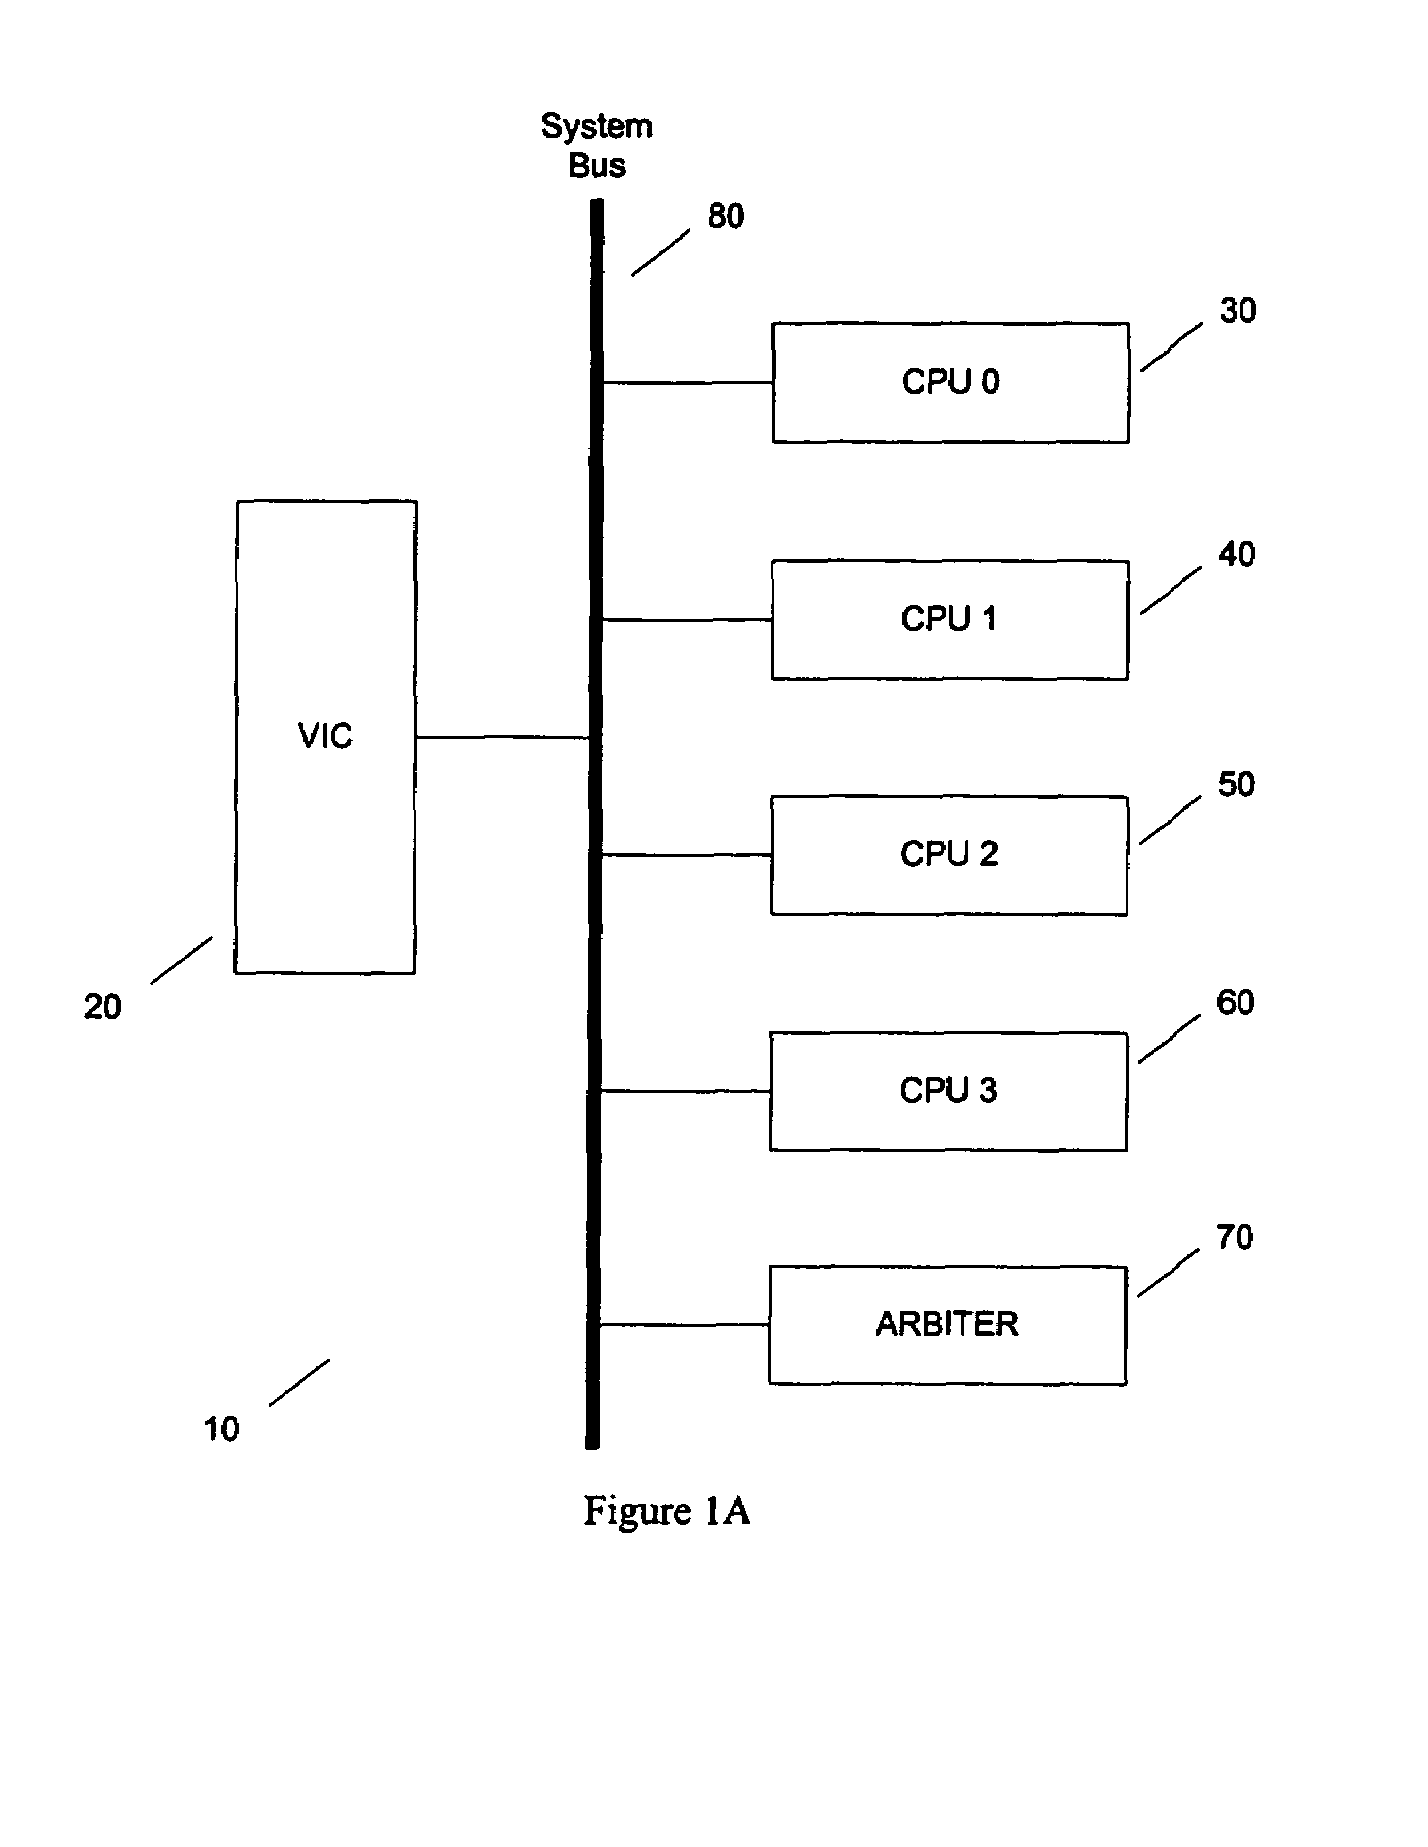 Handling interrupts in a system having multiple data processing units